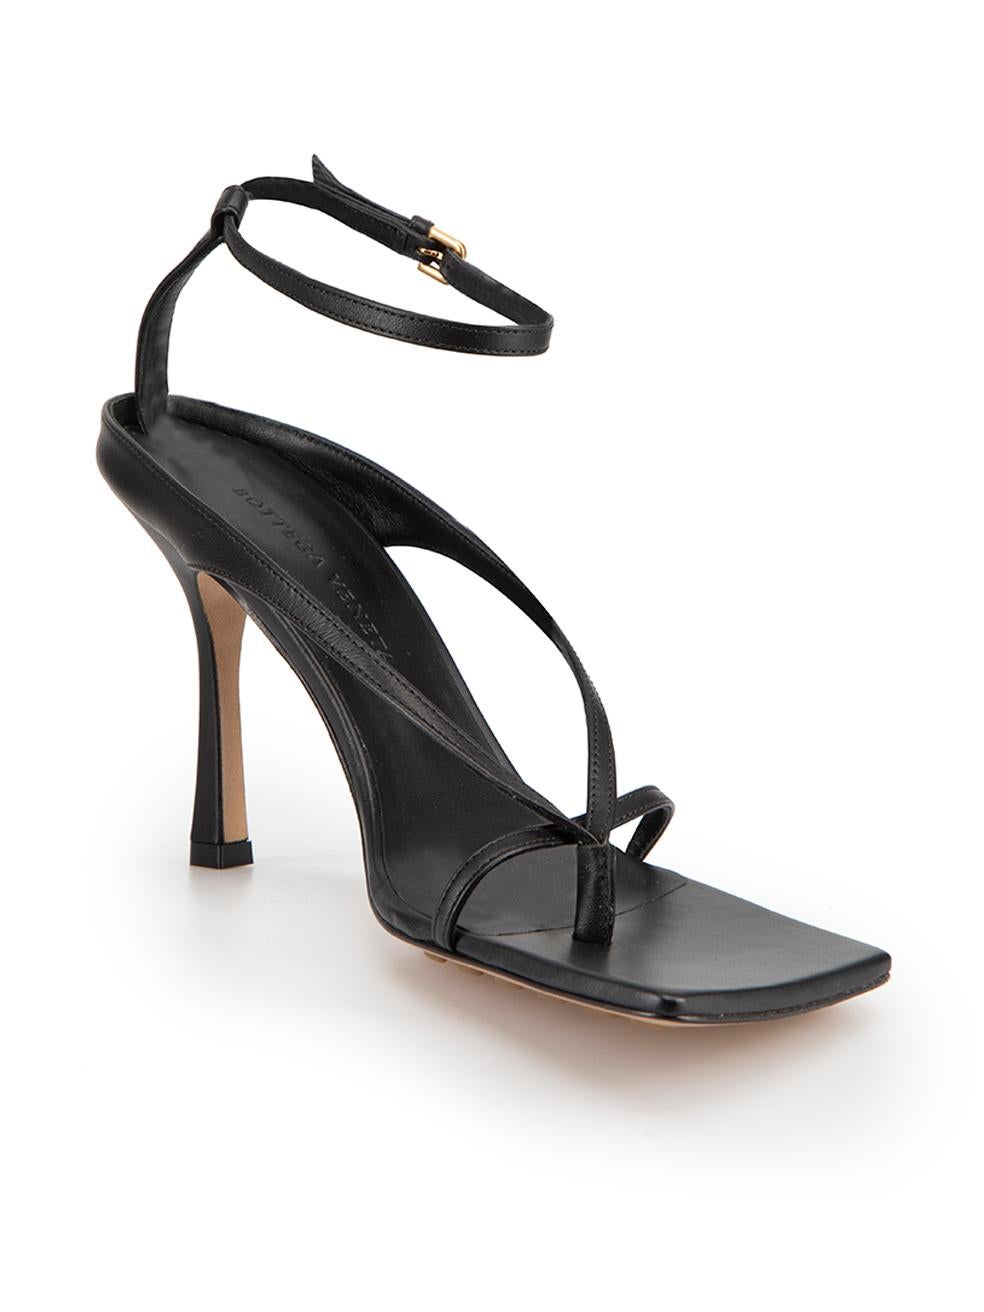 CONDITION is Never worn, with tags. No visible wear to shoes is evident on this new Bottega Veneta designer resale item. These shoes come in original box with dust bags.



Details


Black

Leather

Thong sandals

Open square toe

High heel

Ankle